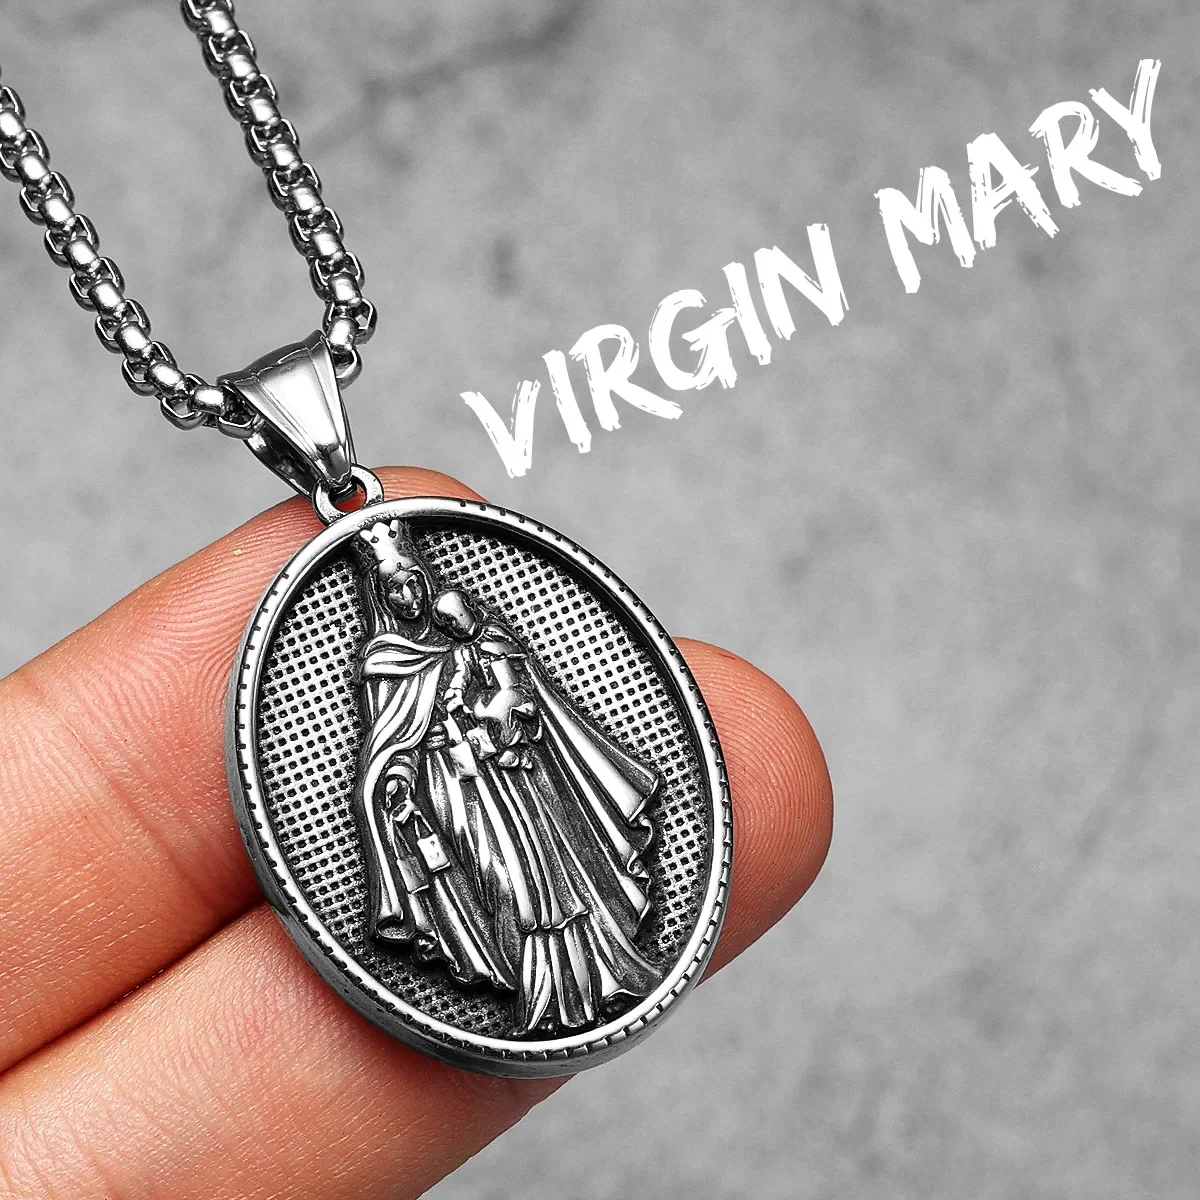 Virgin Mary Stainless Steel Men Necklaces Pendants Chains Women Jewelry New Cool Powerful Amulet Accessories Gifts